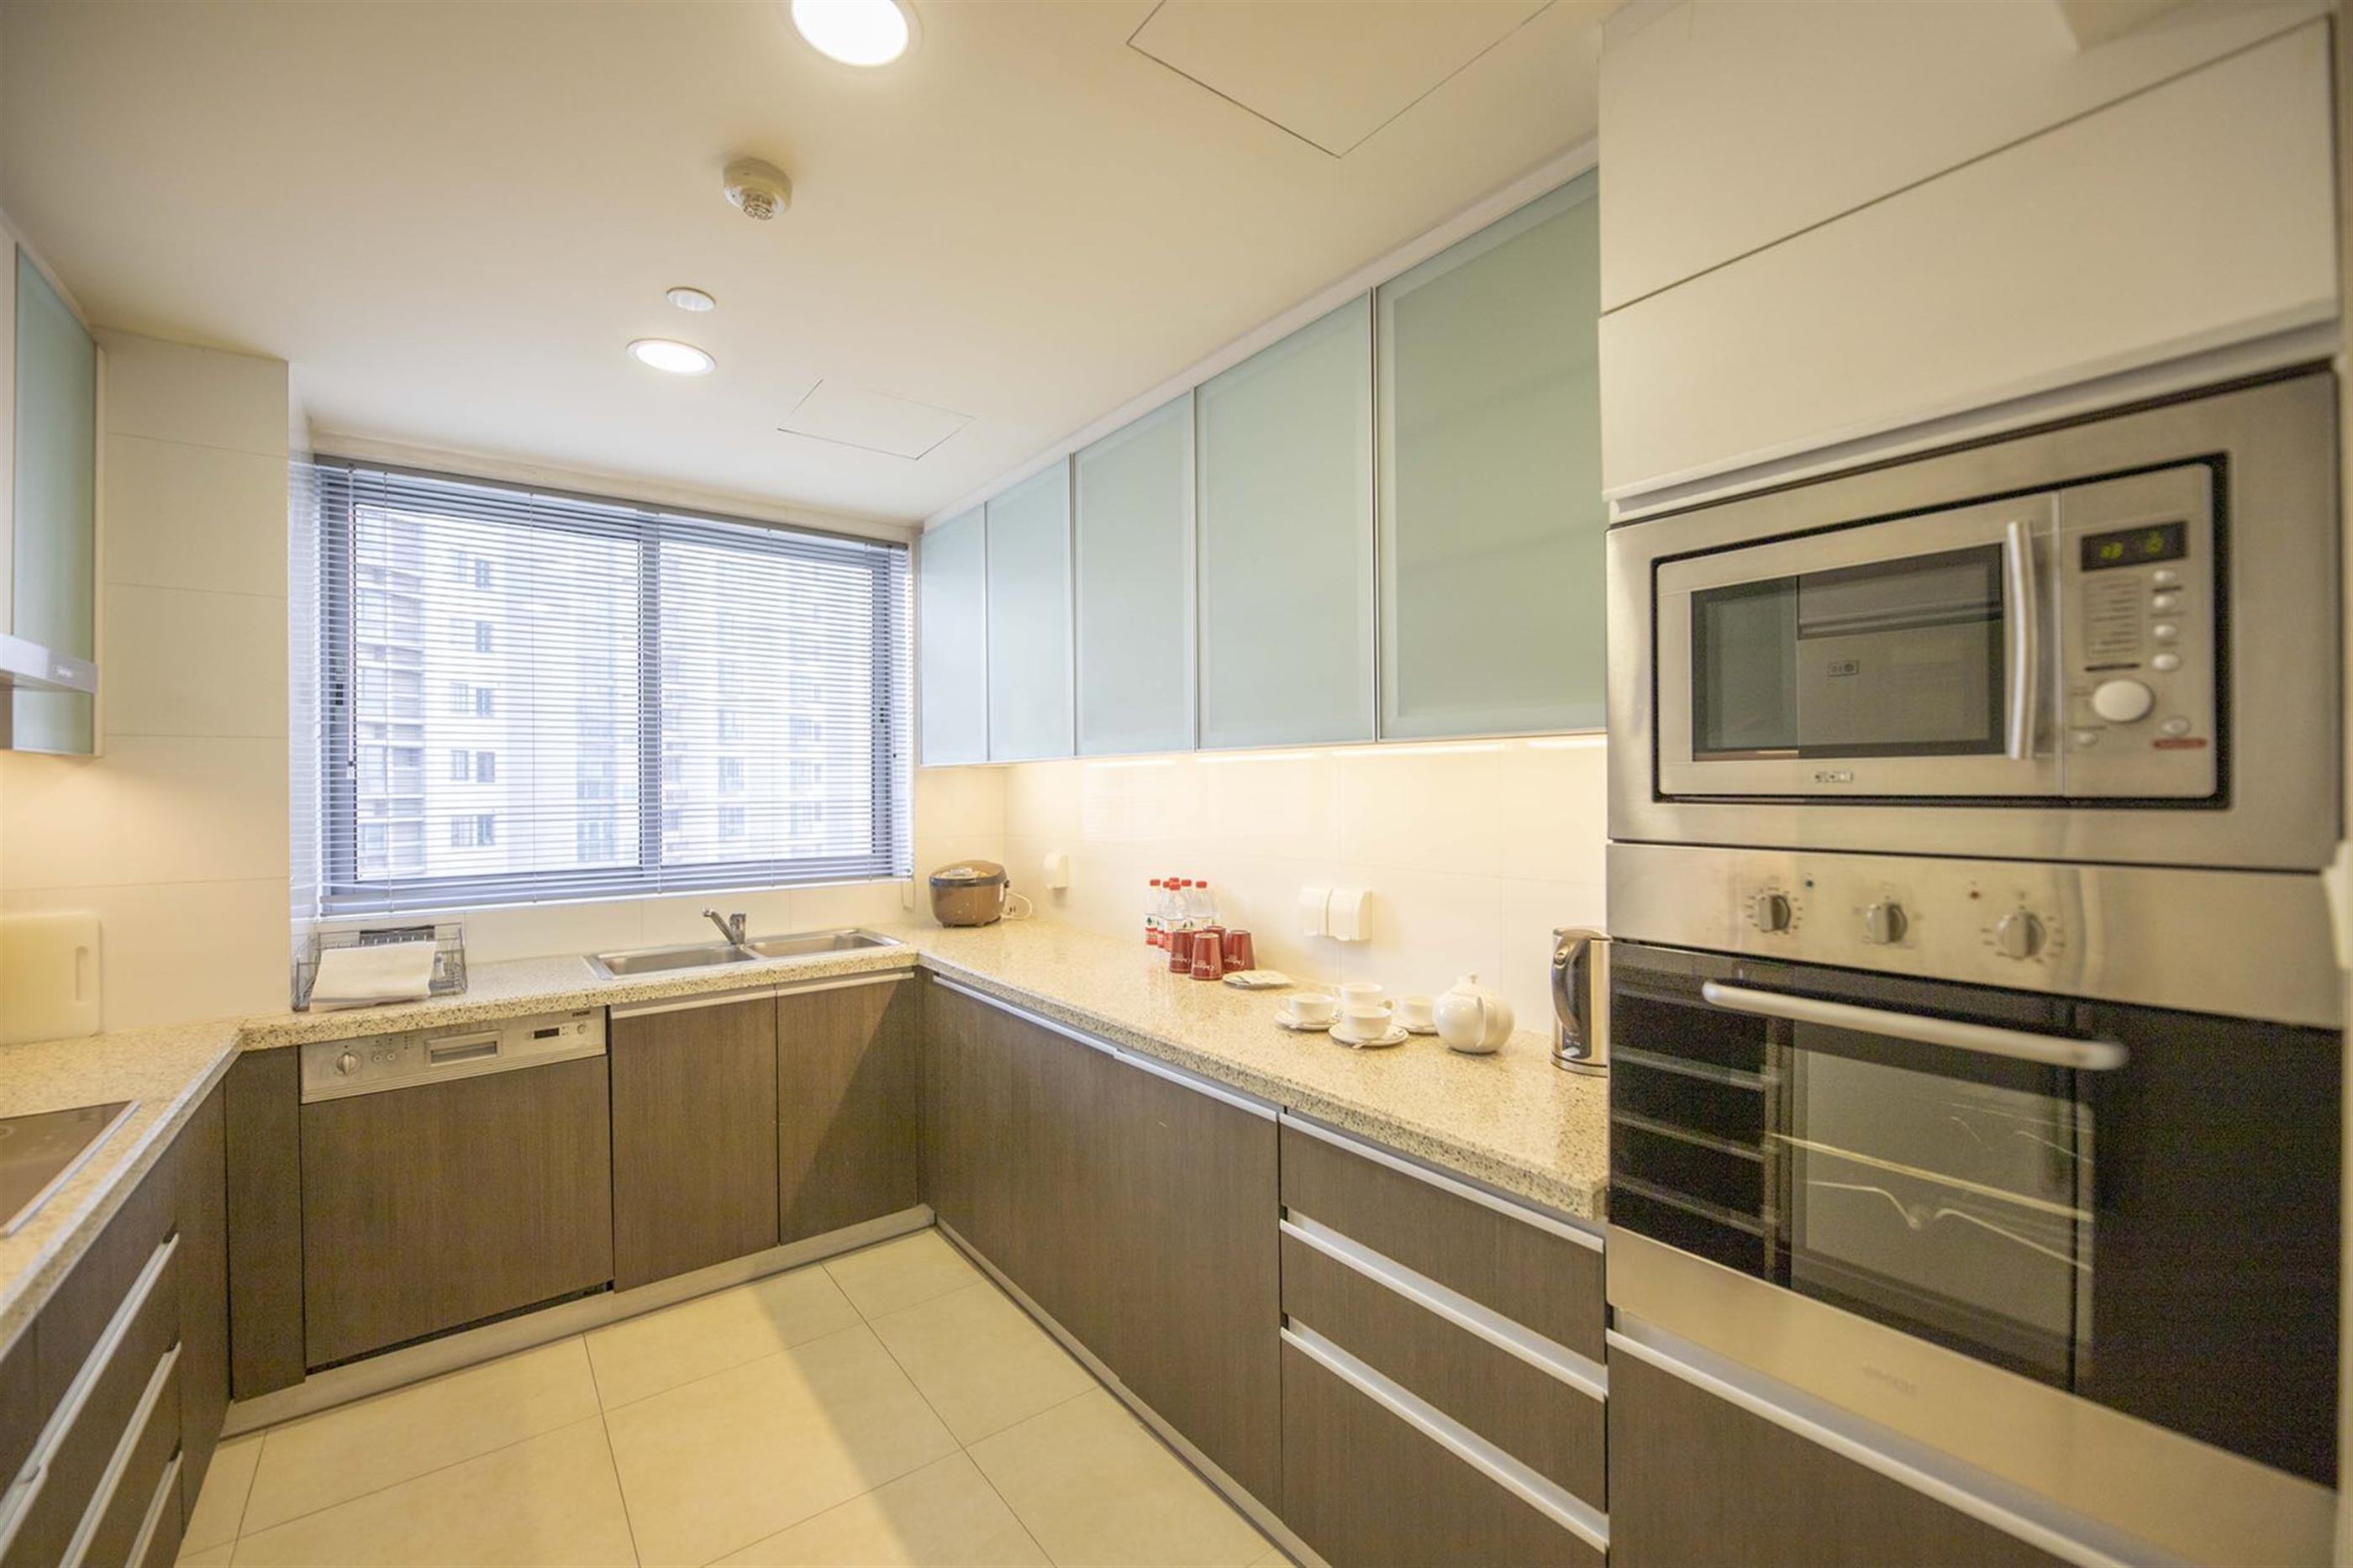 Large kitchen New Deluxe 3BR/3BathR Putuo Service Apartments nr LN 3/4/11/14 for Rent in Shanghai